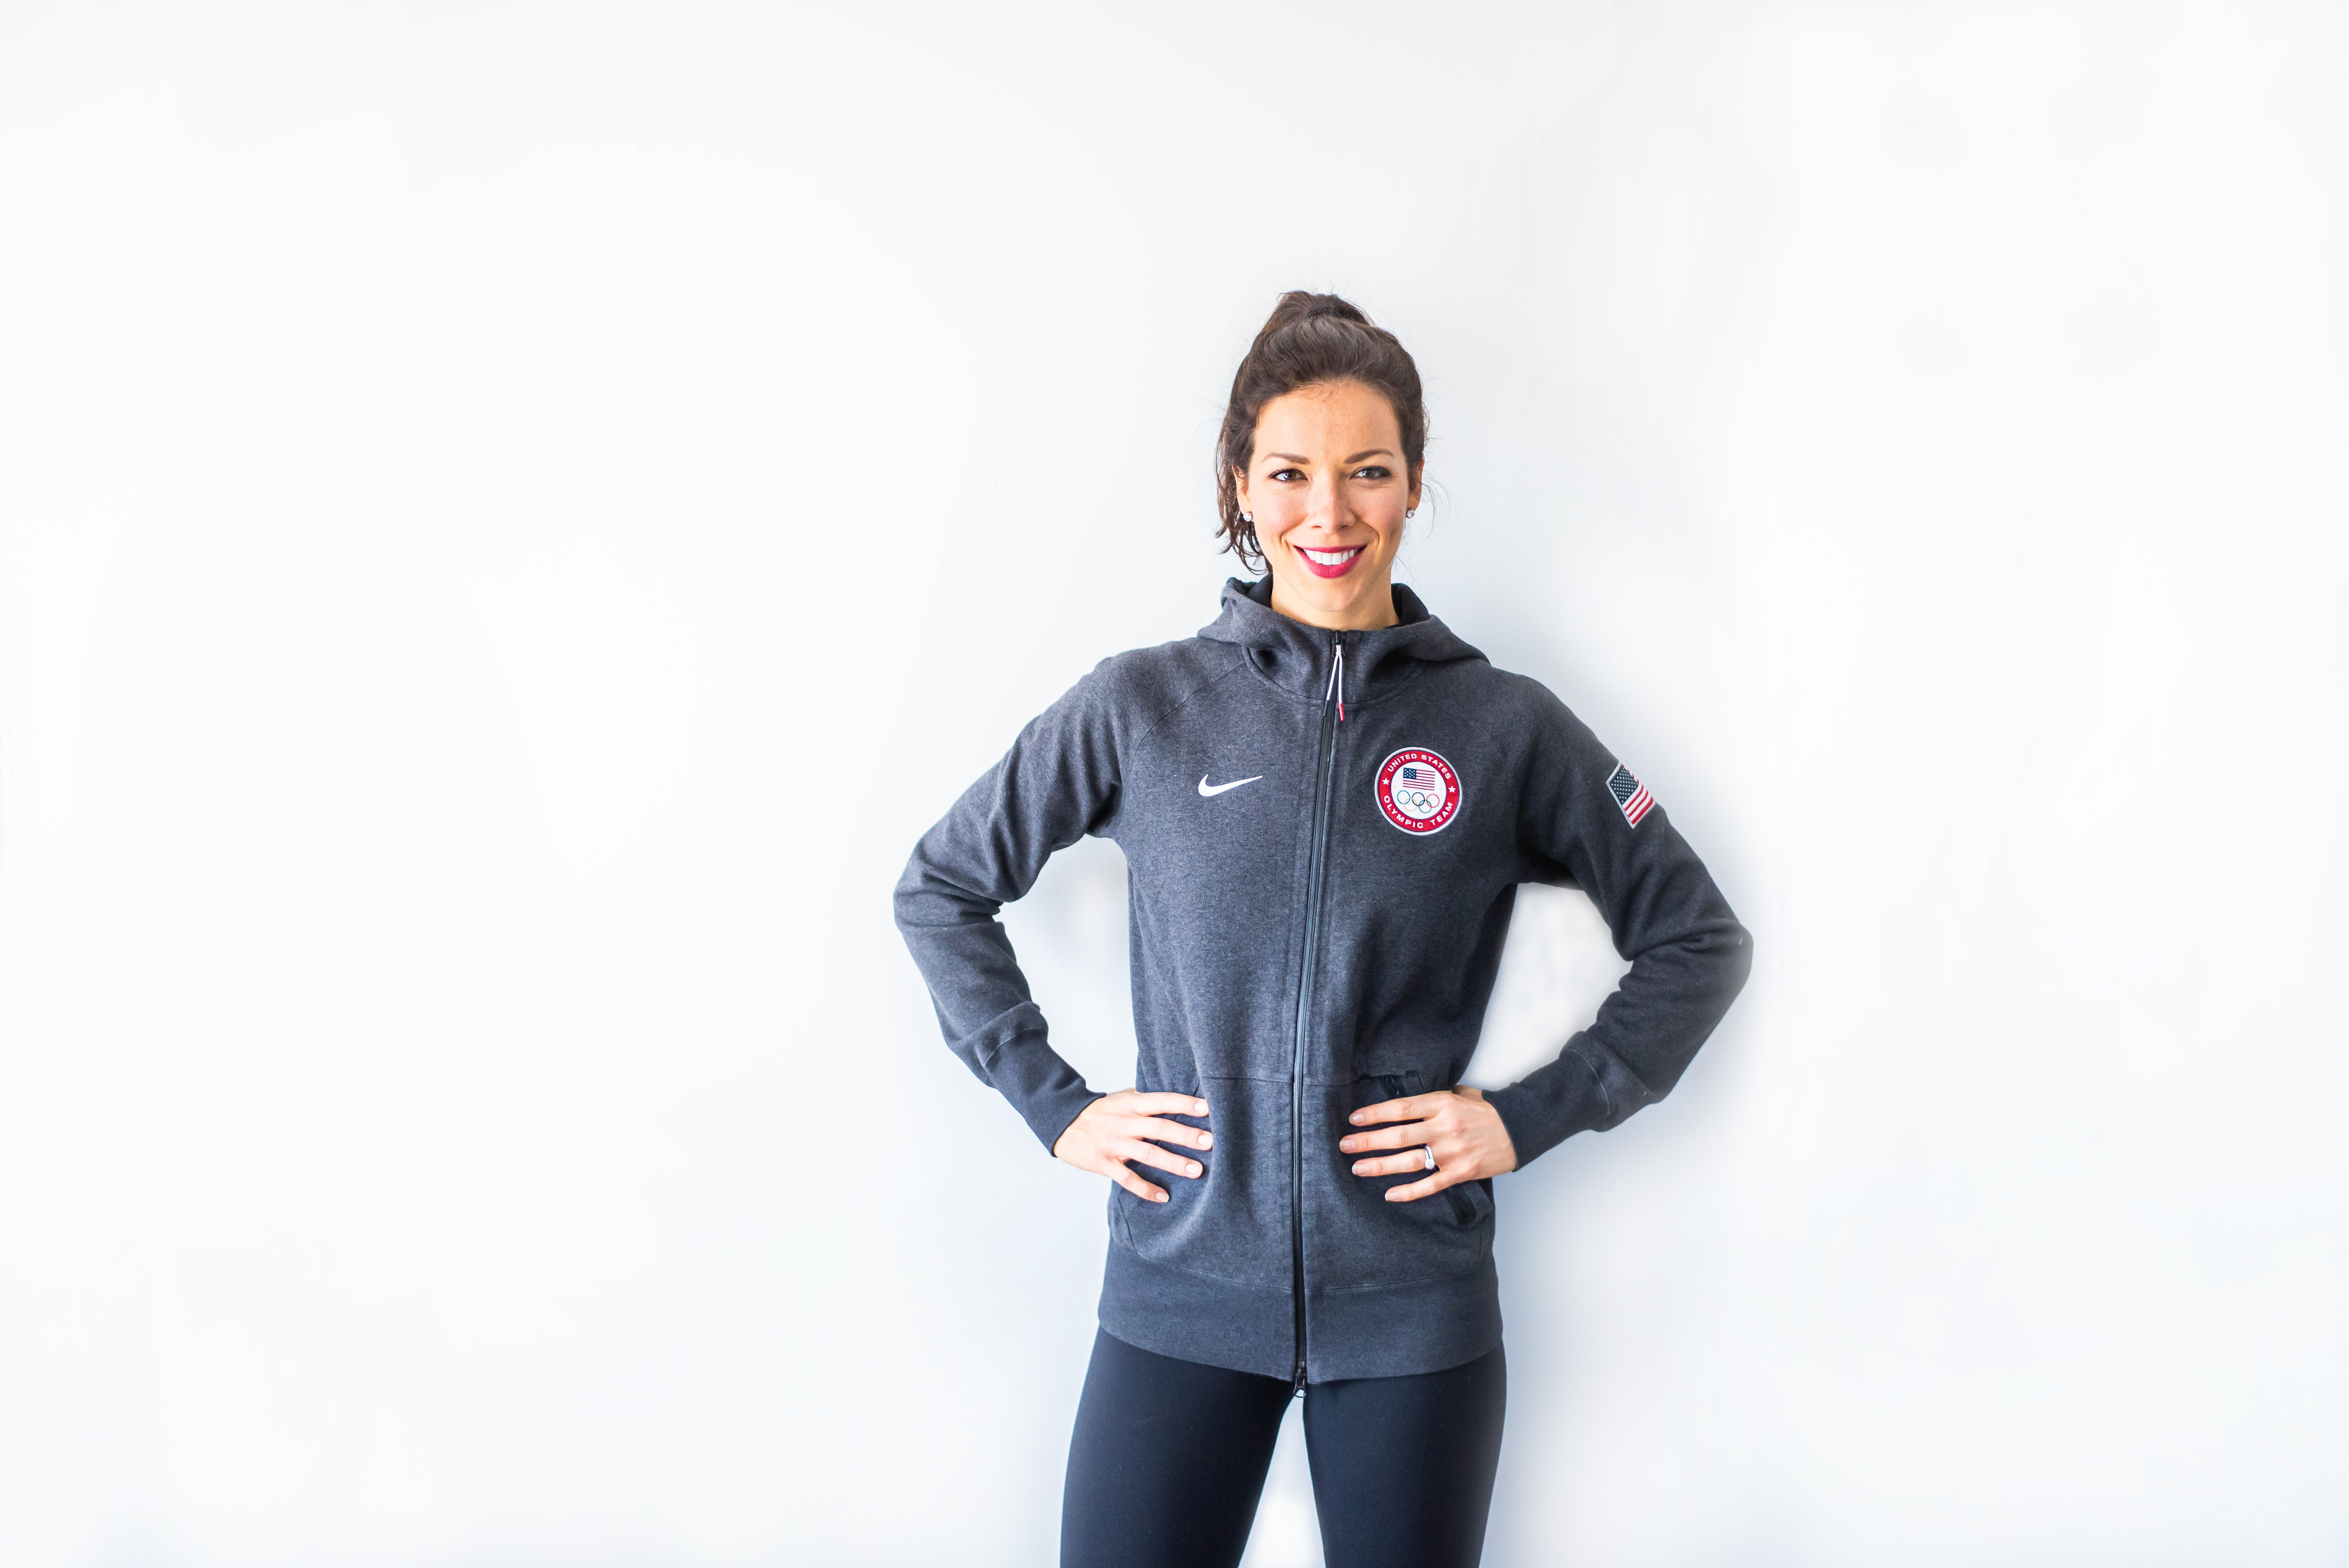 US Olympian, Kate Ziegler posing in Olympic gear with hand on hips